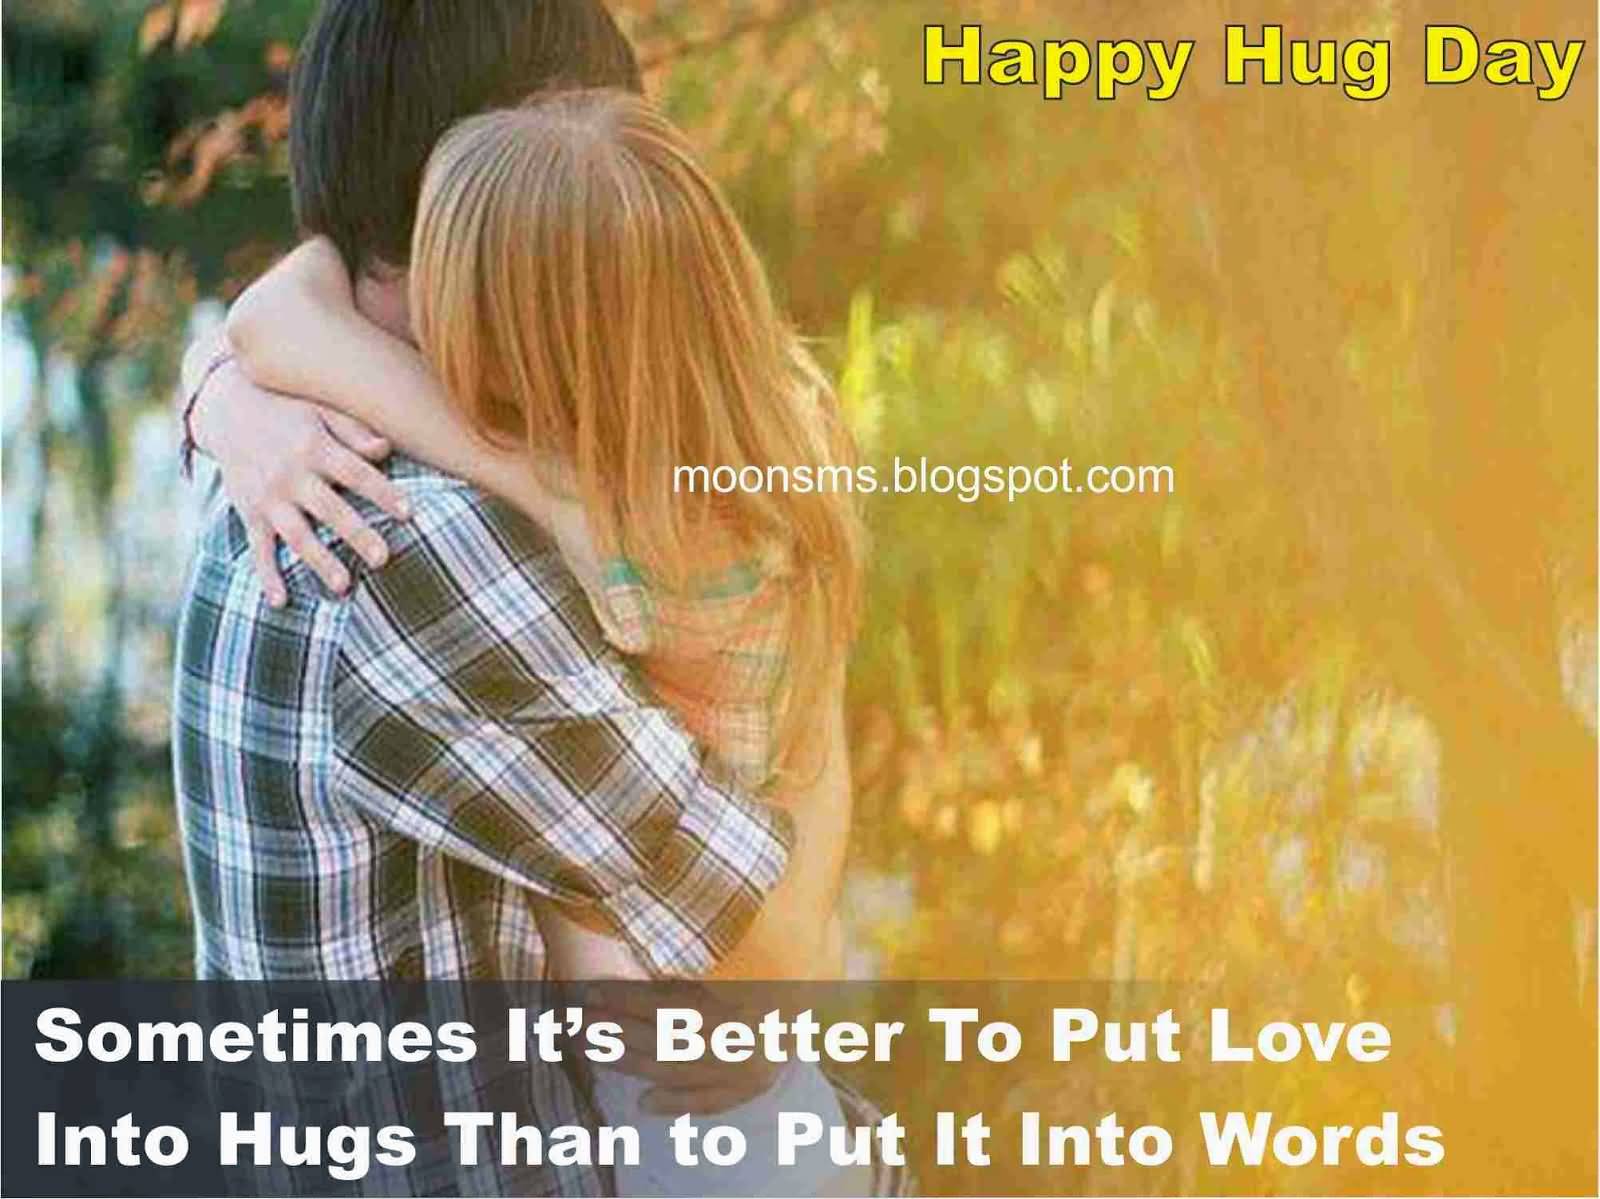 Happy Hug Day Sometimes It’s Better To Put Love Into Hugs Than To Put In Into Words